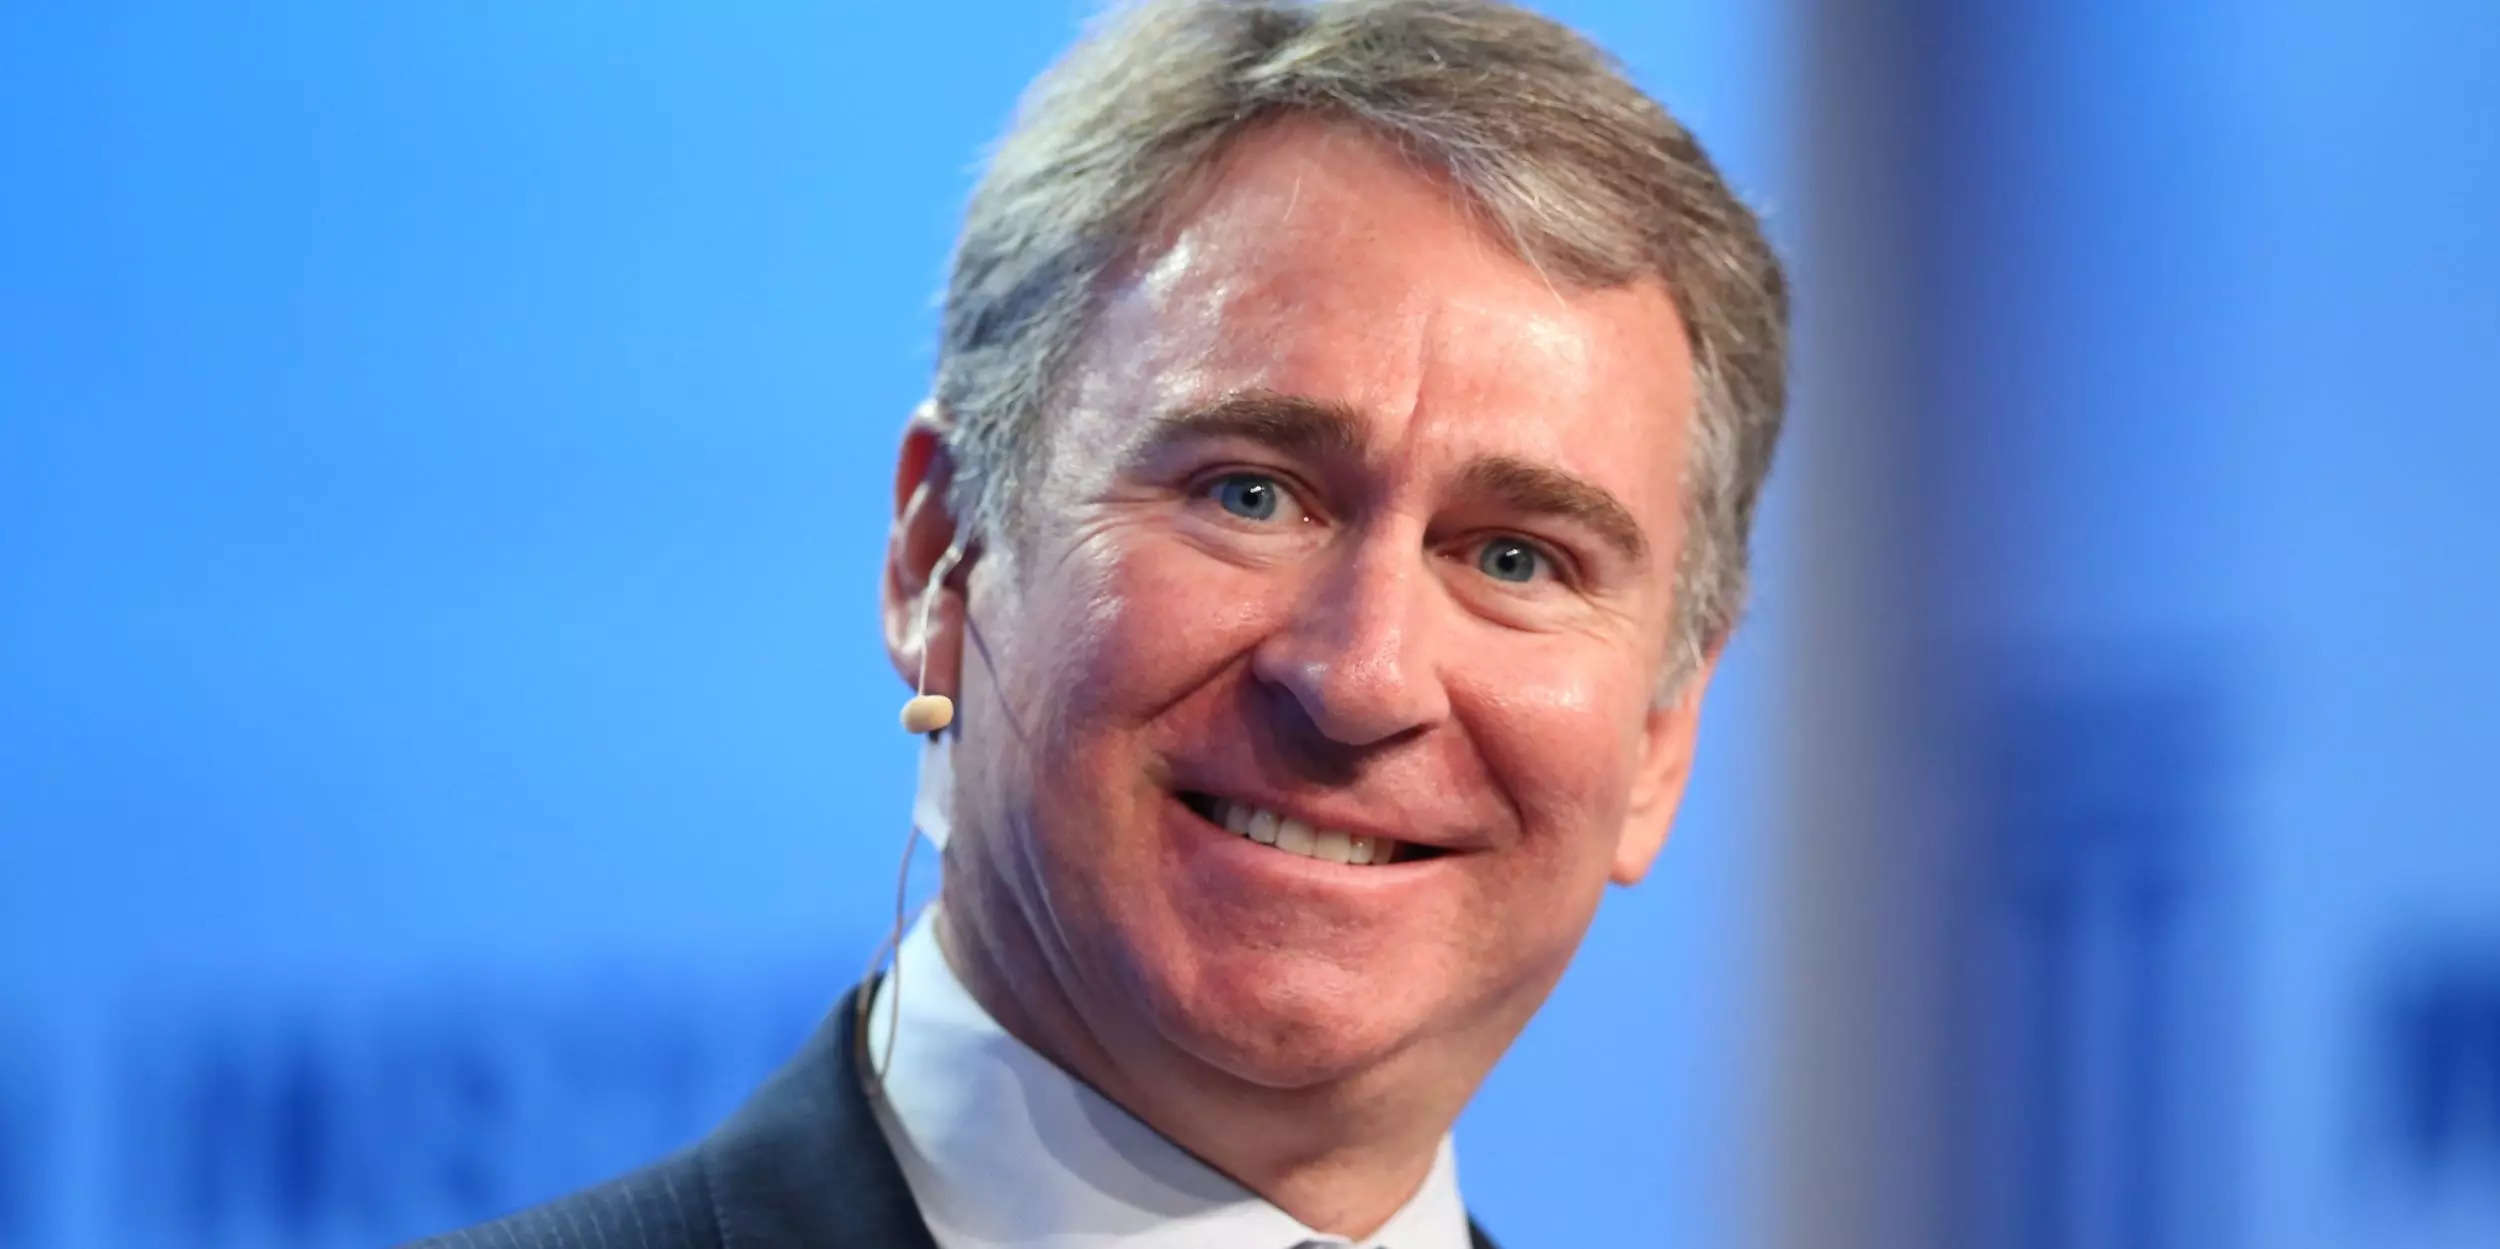 
Ken Griffin's Citadel Securities receives its first outside investment from Sequoia at $22 billion valuation, report says
